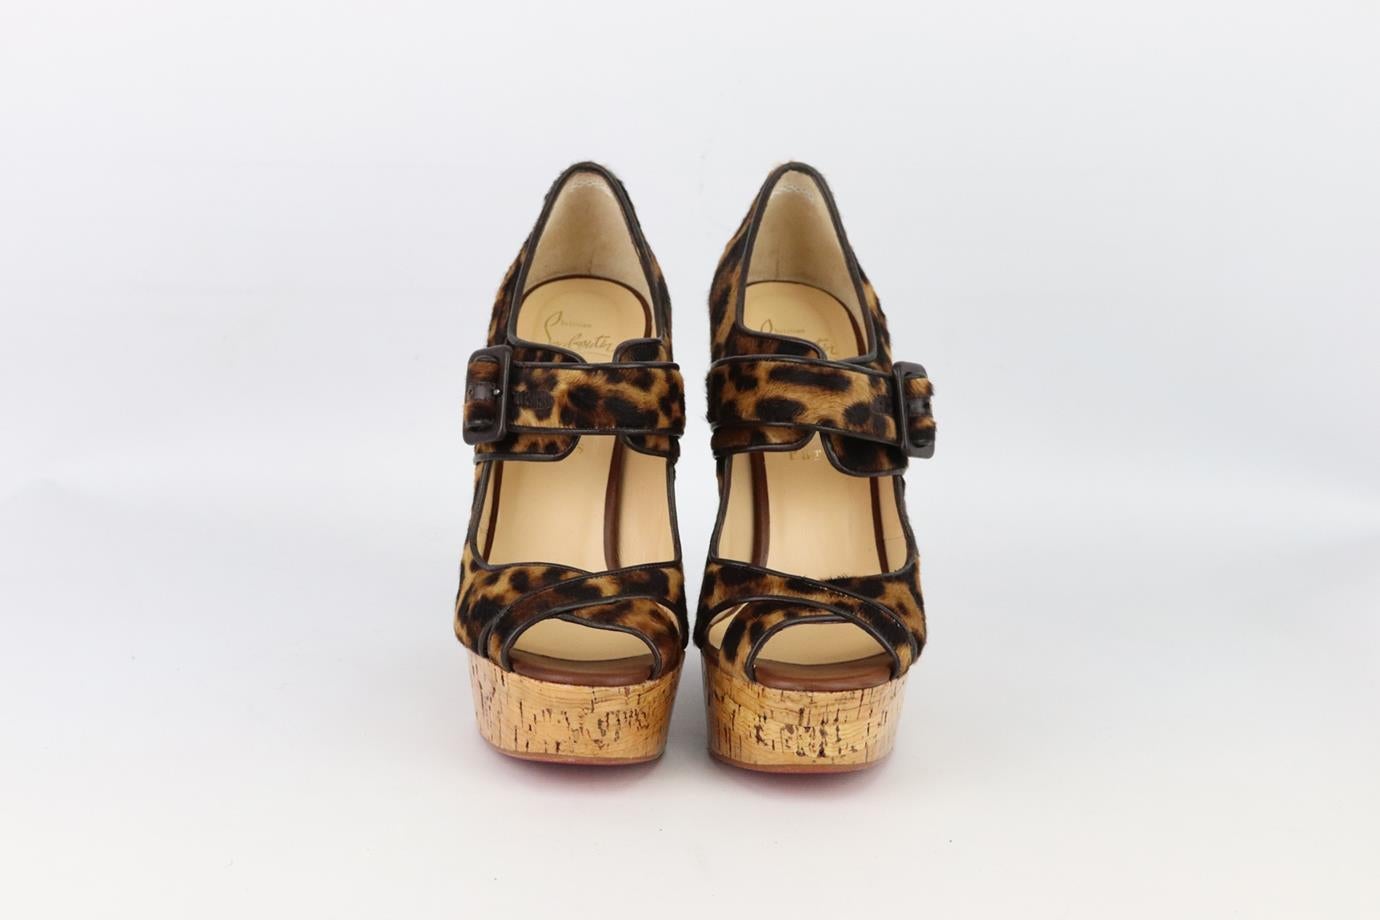 Christian Louboutin leopard print calf hair wedge sandals. Made from leopard-print calf-hair with buckle detail that are set on a cork wedge with the brand’s iconic red sole. Brown, black and tan. Buckle fastening at front. Does not come with box or